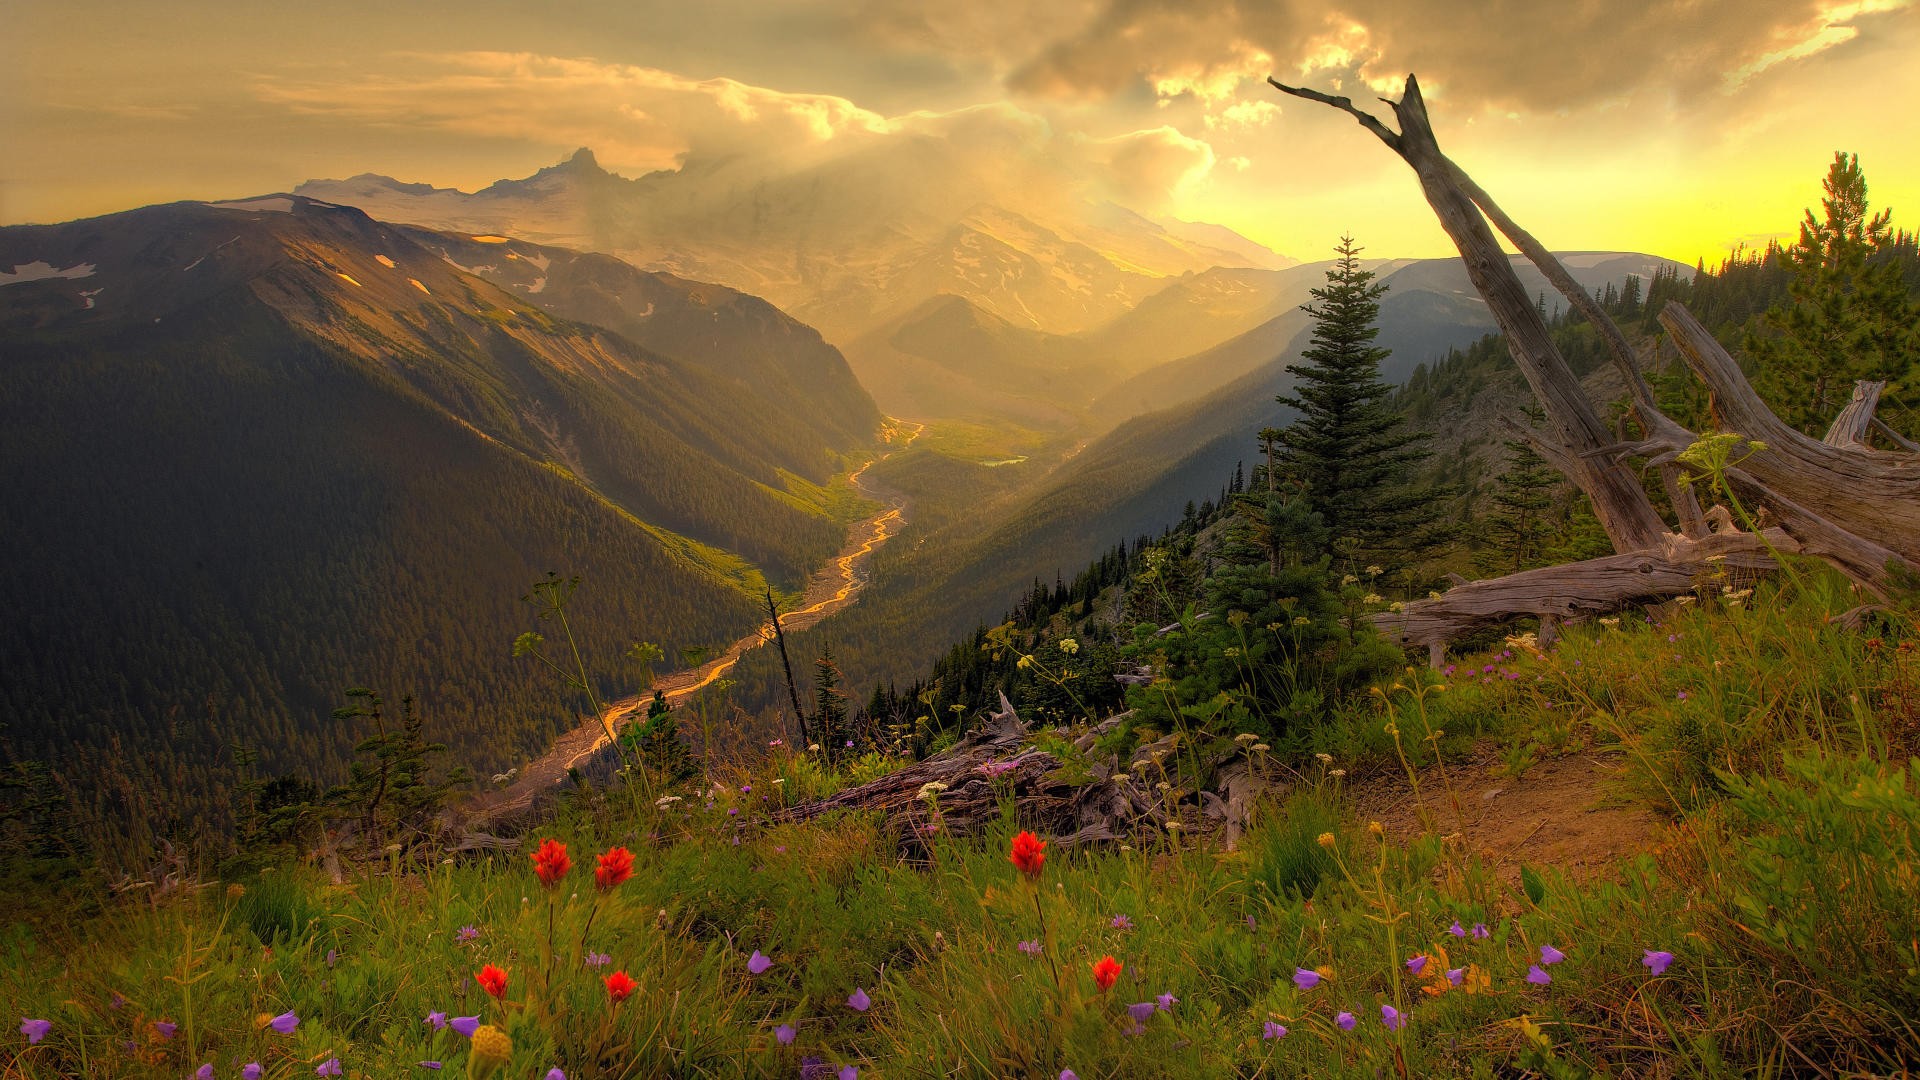 General 1920x1080 mountains flowers grass trees clouds nature landscape valley plants outdoors